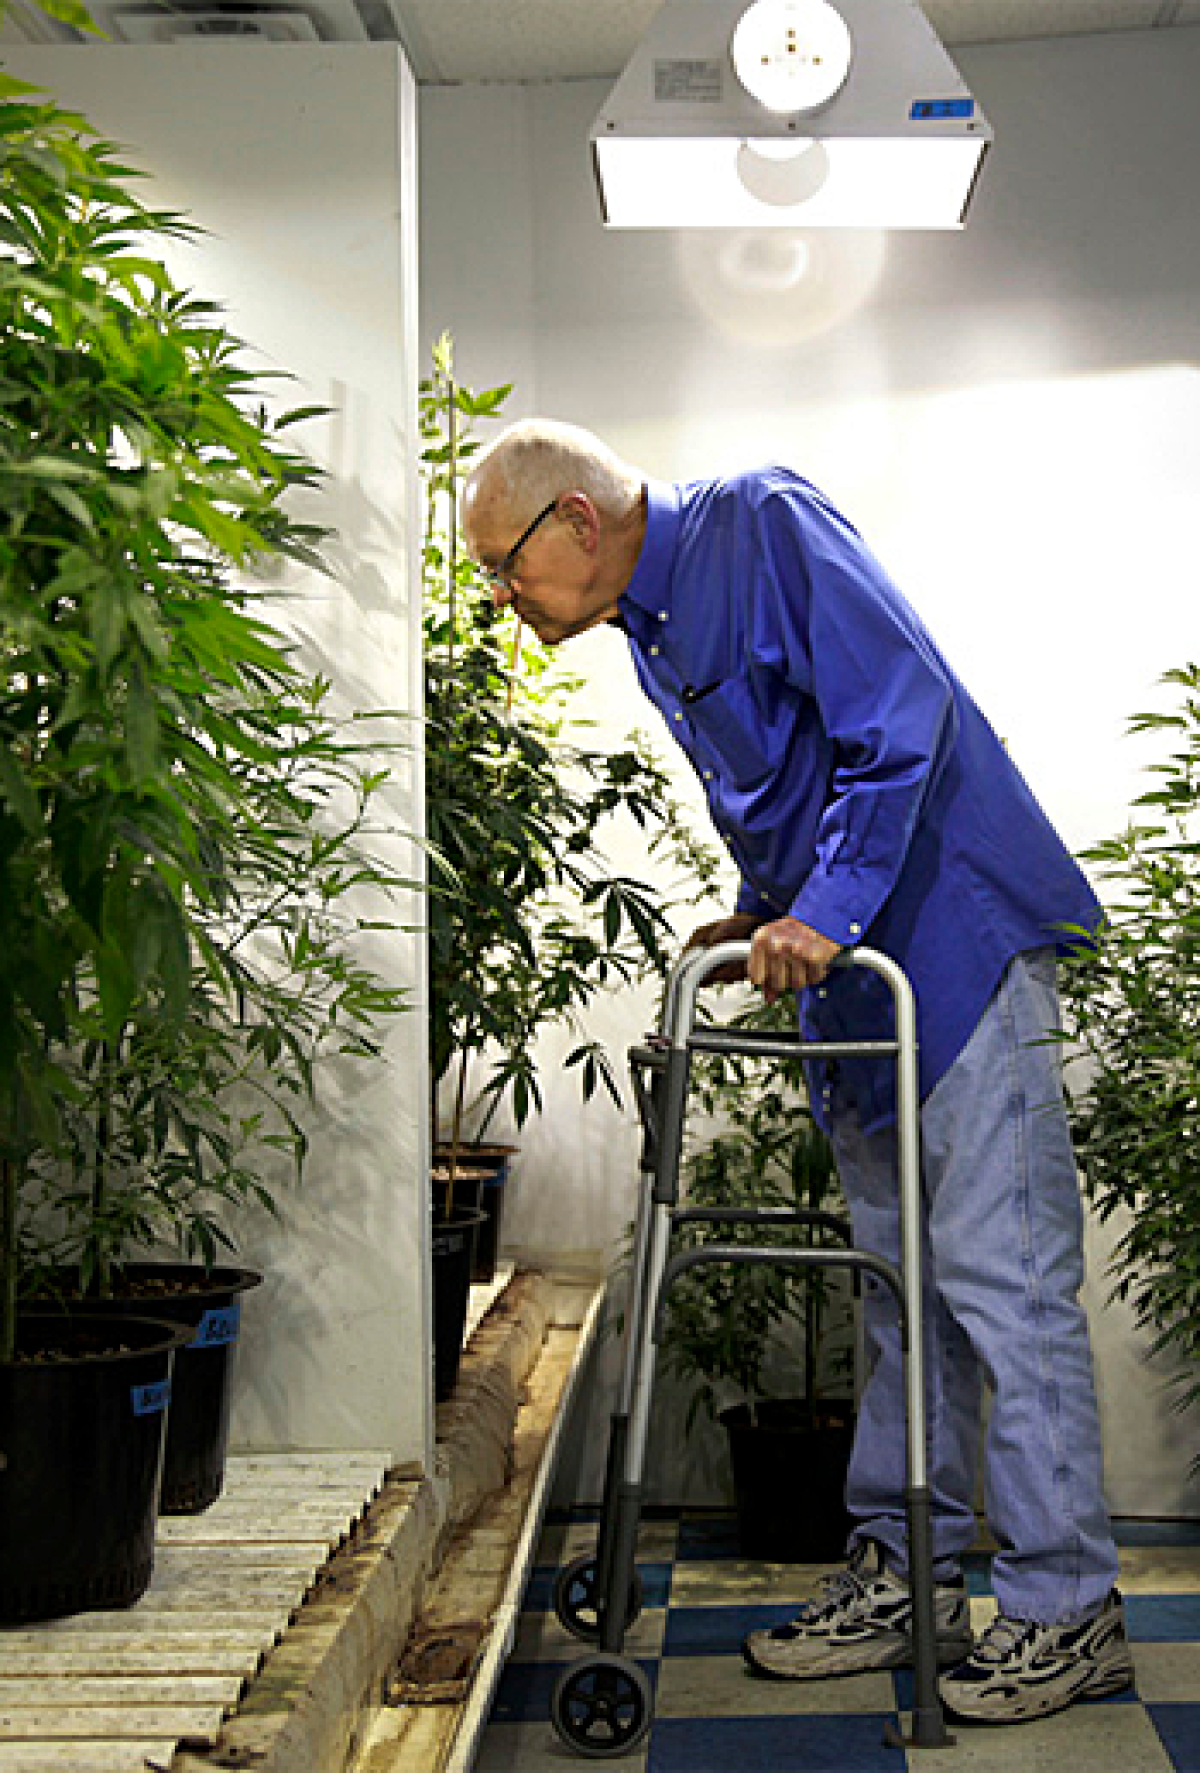 City Councilman Bill Rosendahl tours the premises of Herbalcure, a medicinal marijuana collective, in Los Angeles in February. Rosendahl is a supporter of medicinal marijuana and uses it as part of his cancer treatment.